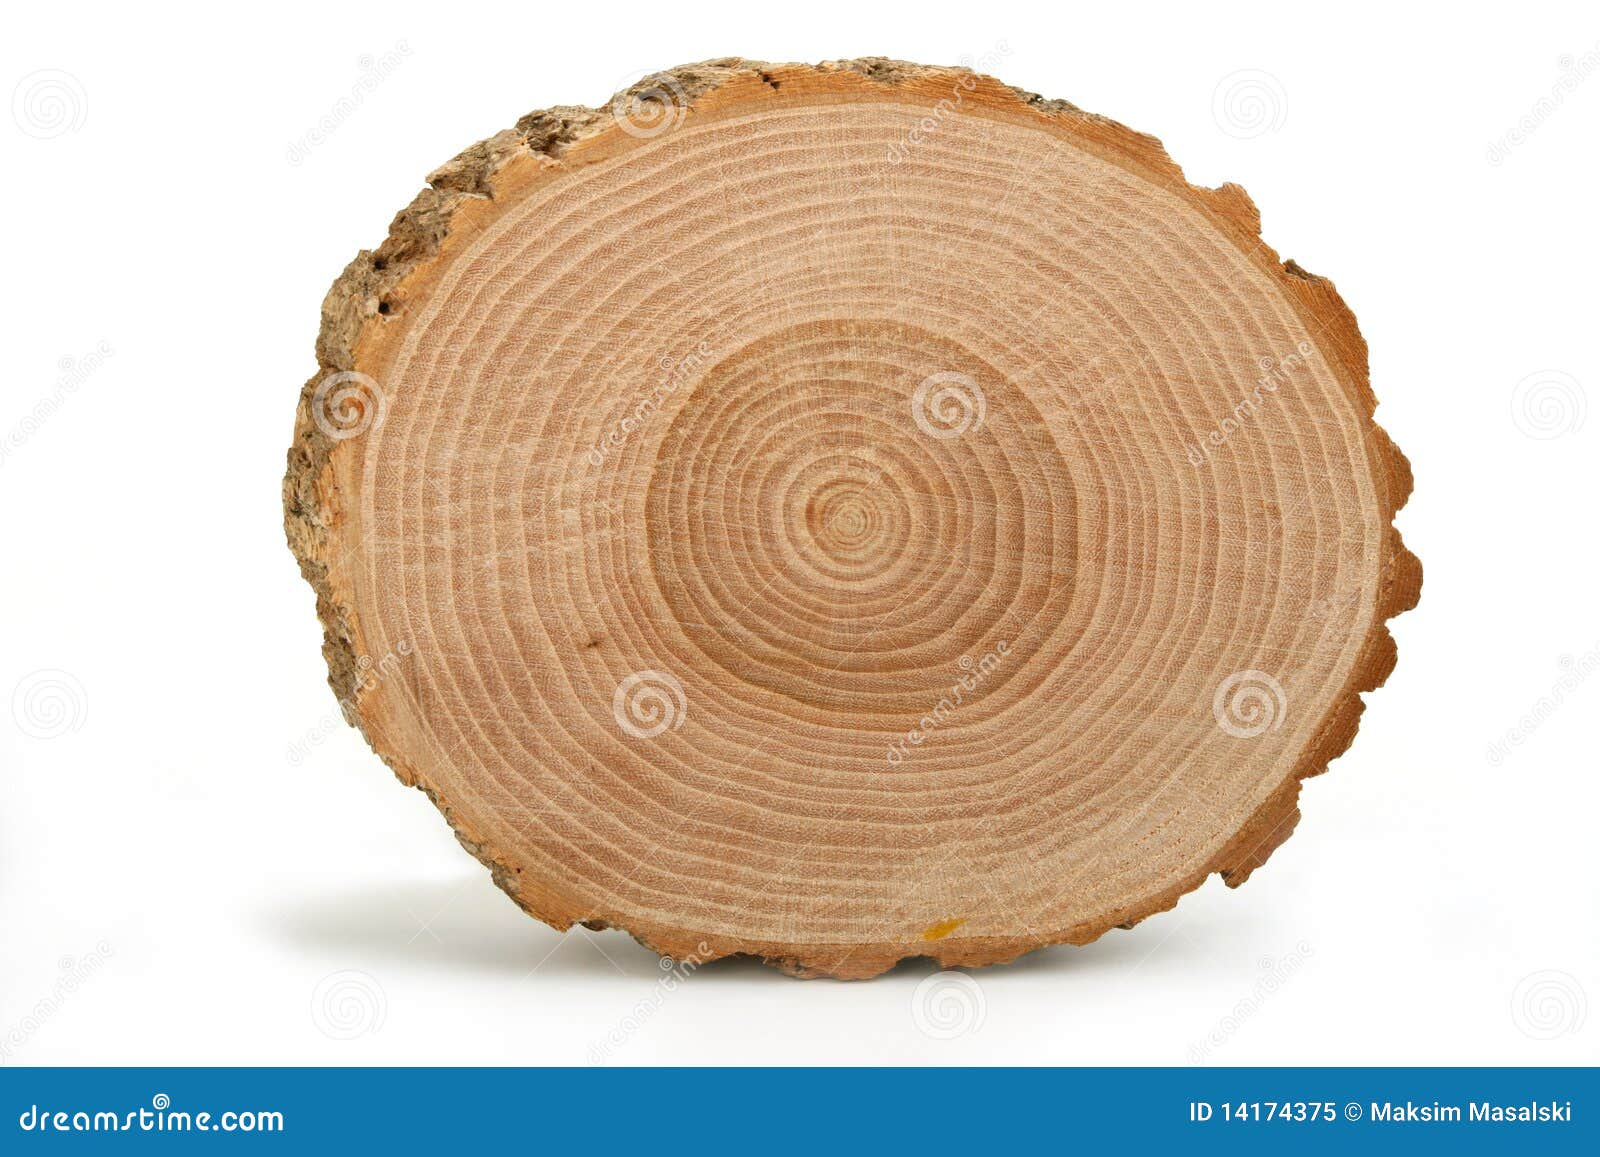 cross section of tree trunk showing growth rings